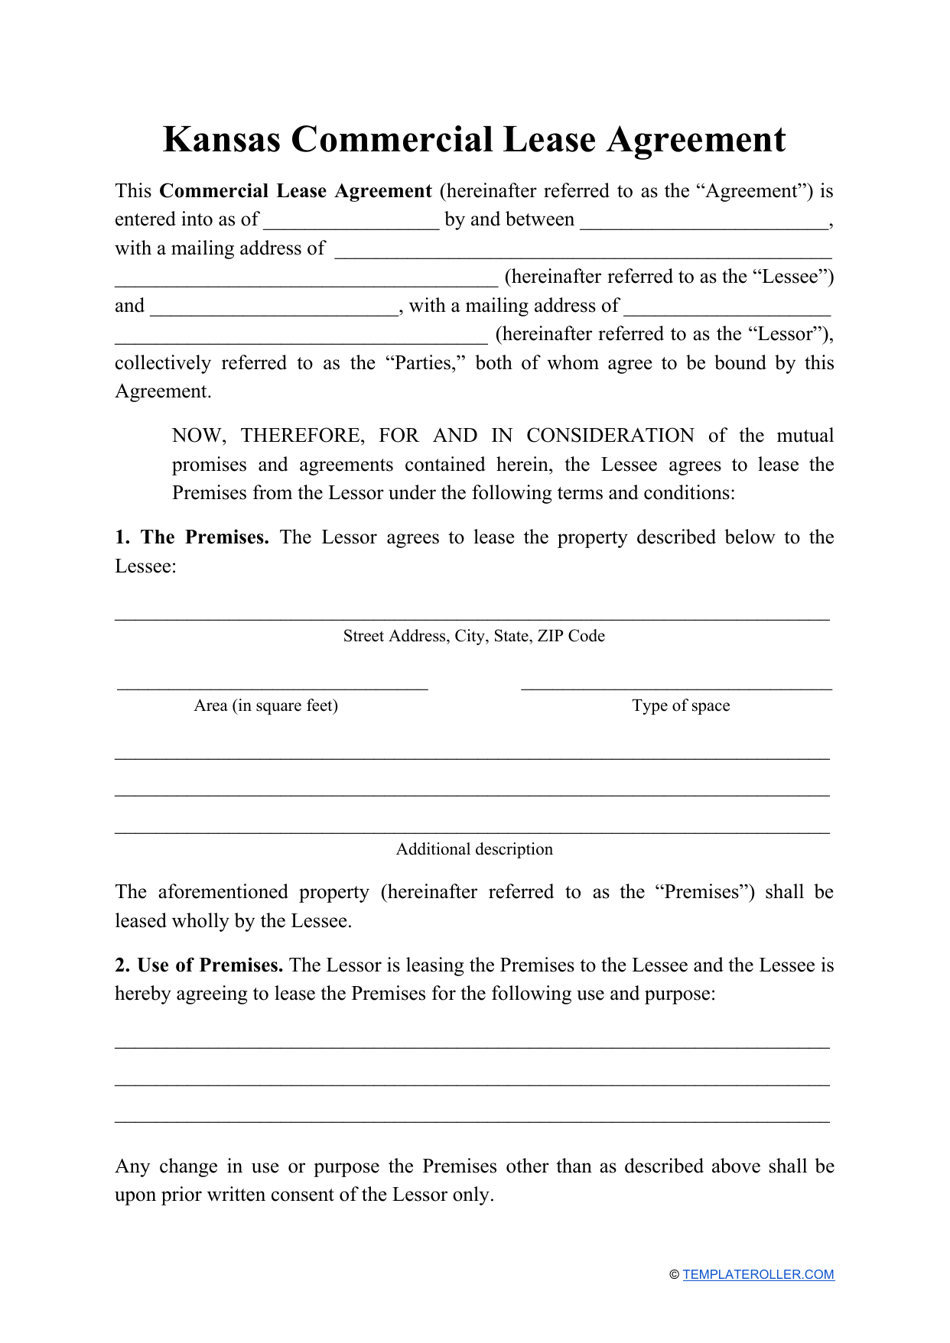 Commercial Lease Agreement Template - Kansas, Page 1